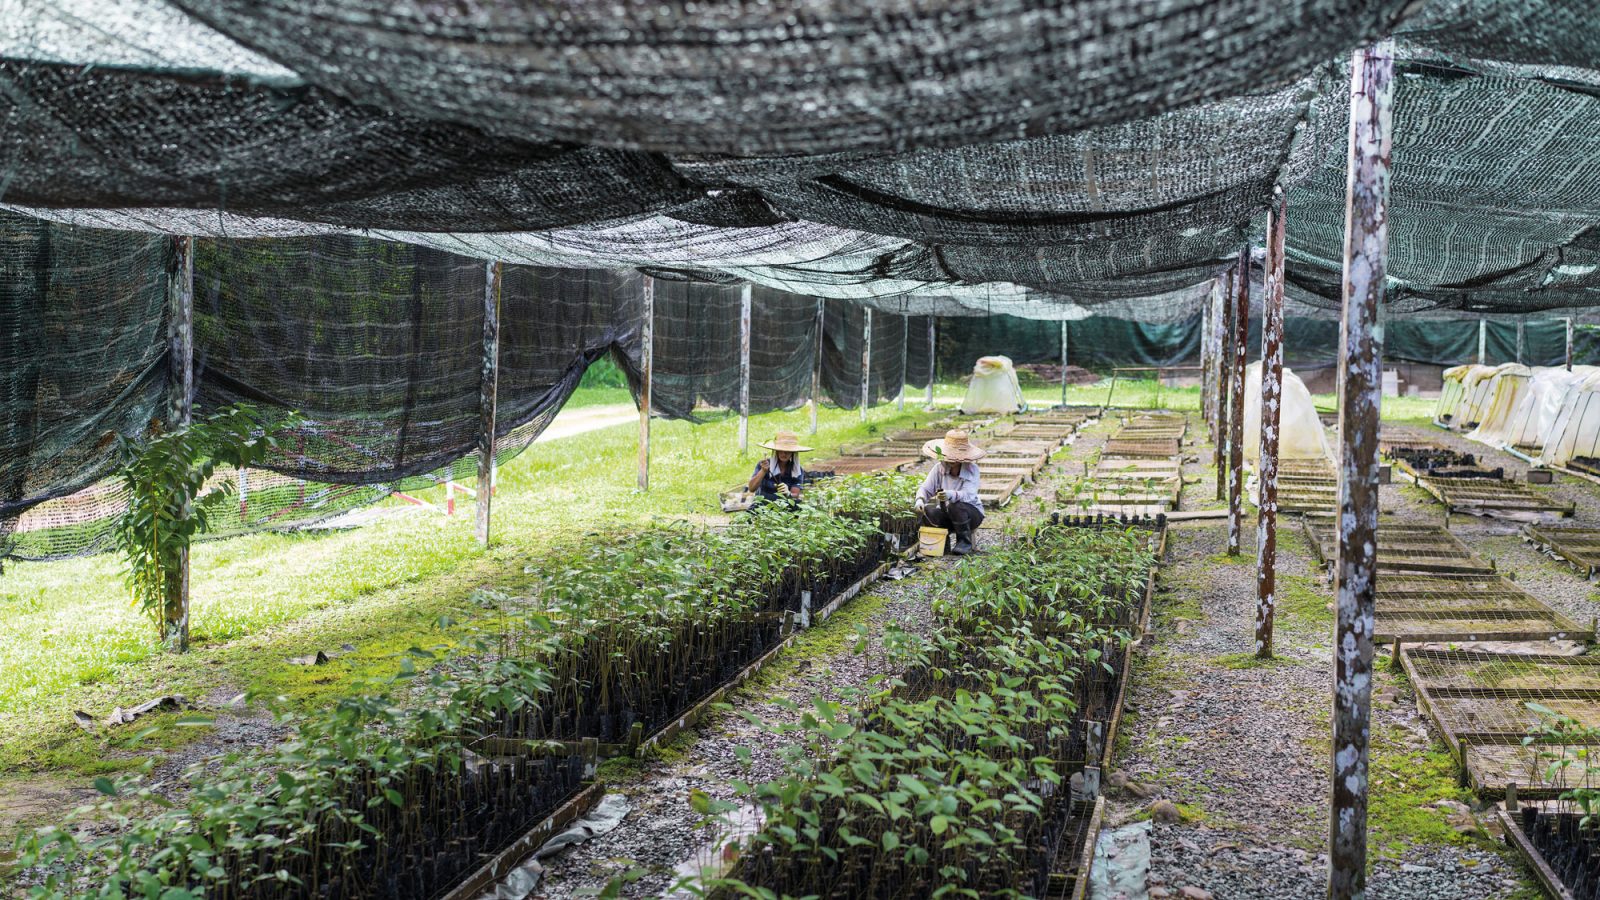 Two people wearing large straw hats work with small plants in replanting beds under net roof.